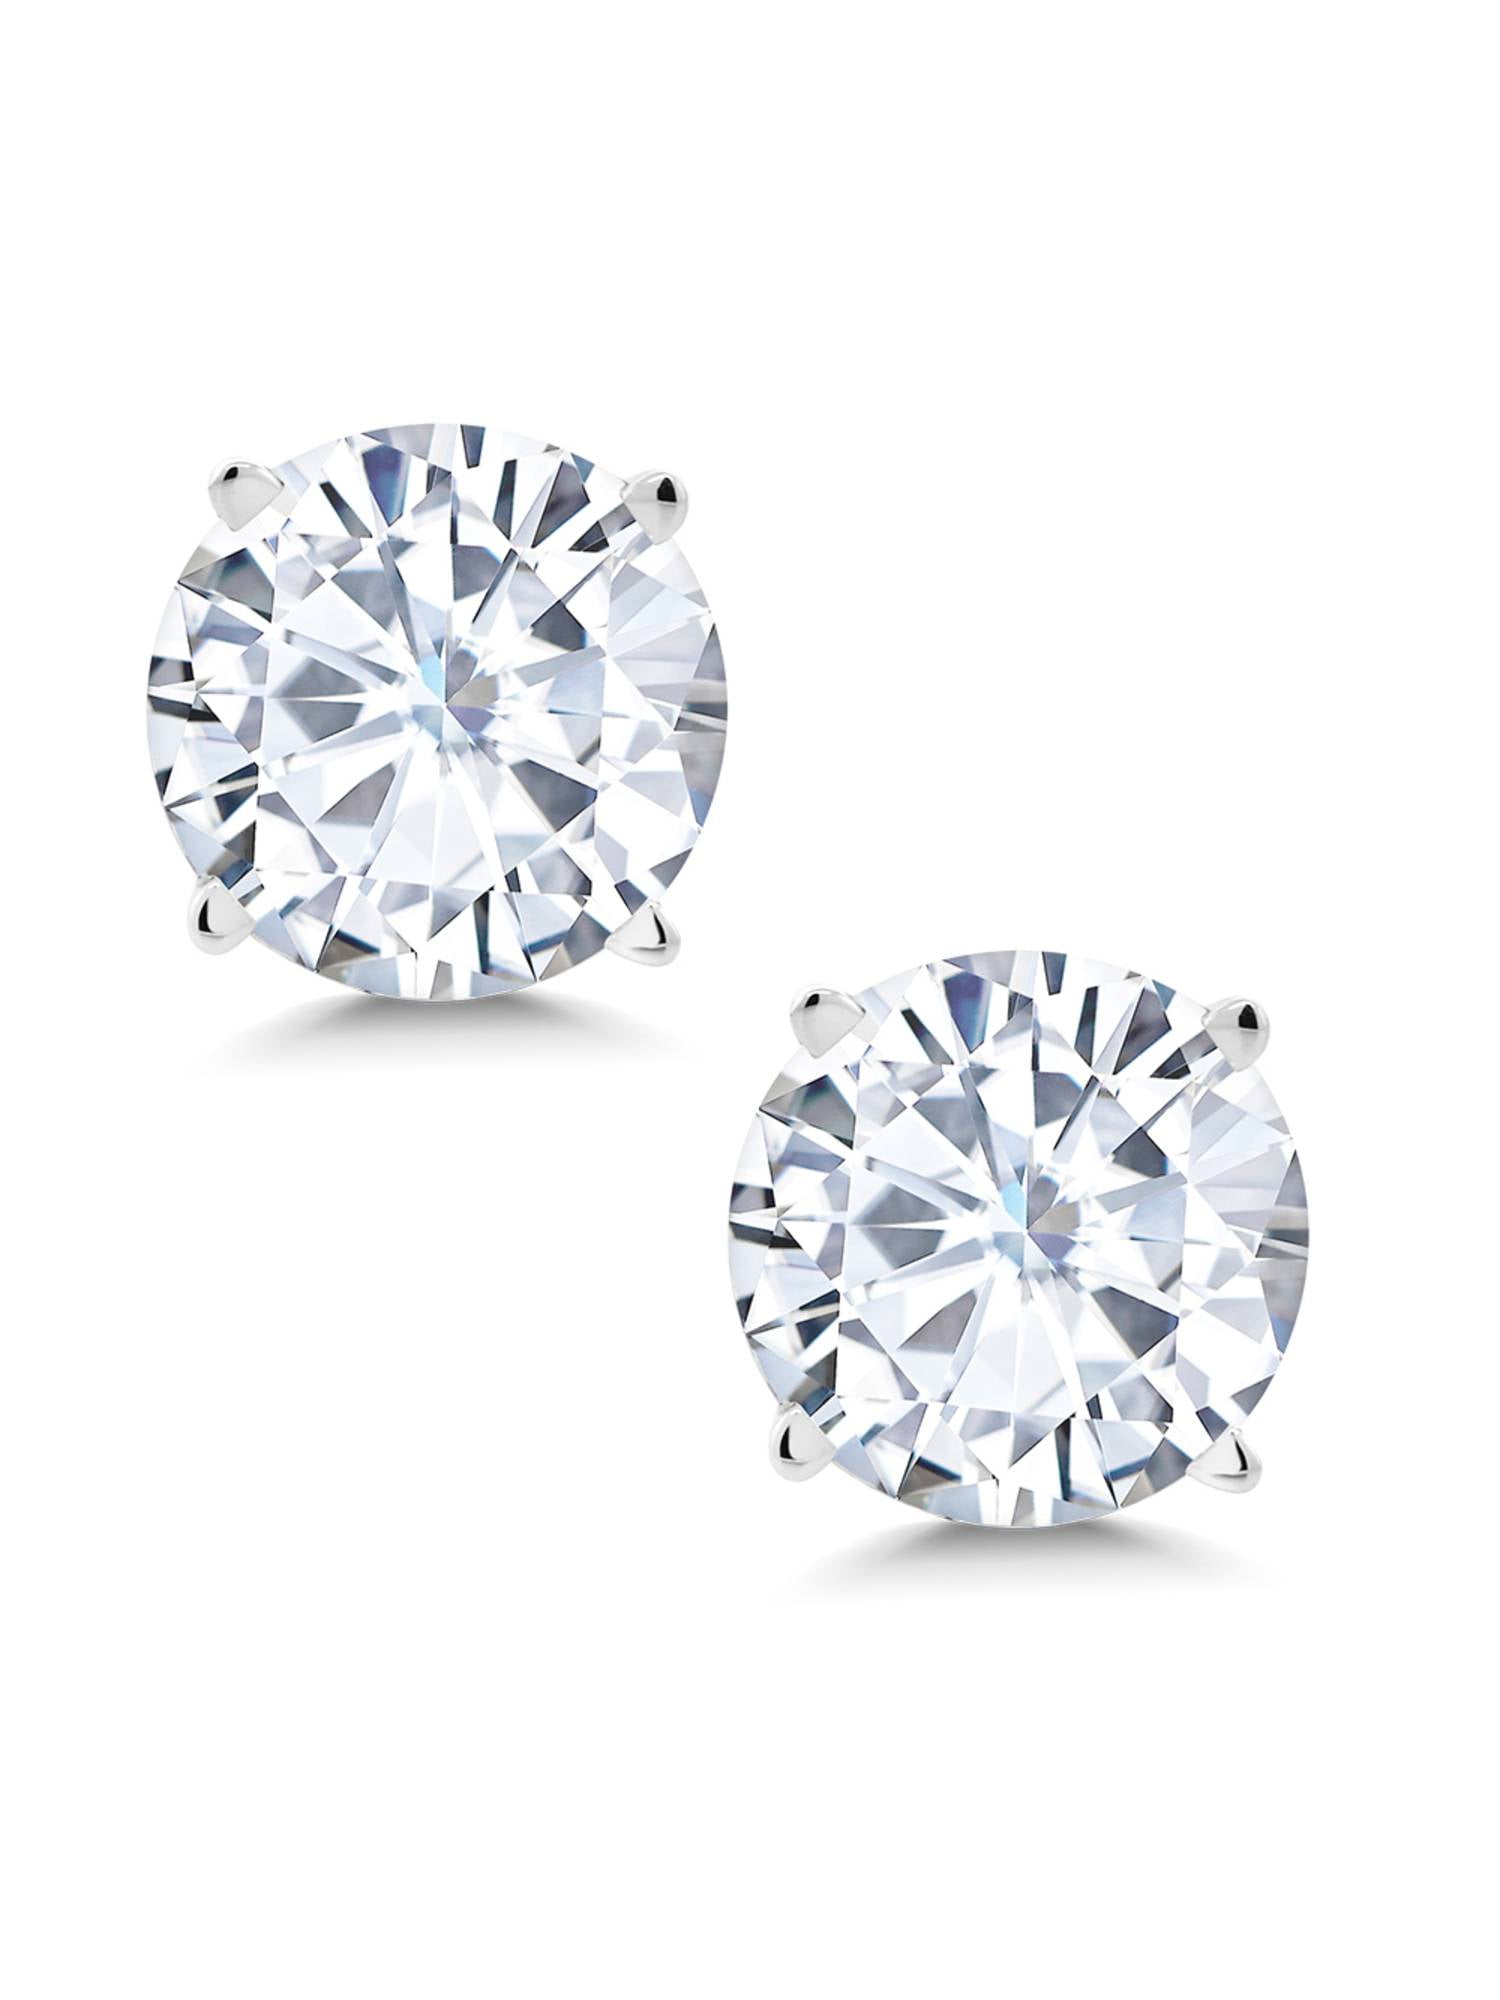 8mm Solitaire Big Moissanite 4-Prong Set Stud Earrings Solid Real 14k White Gold